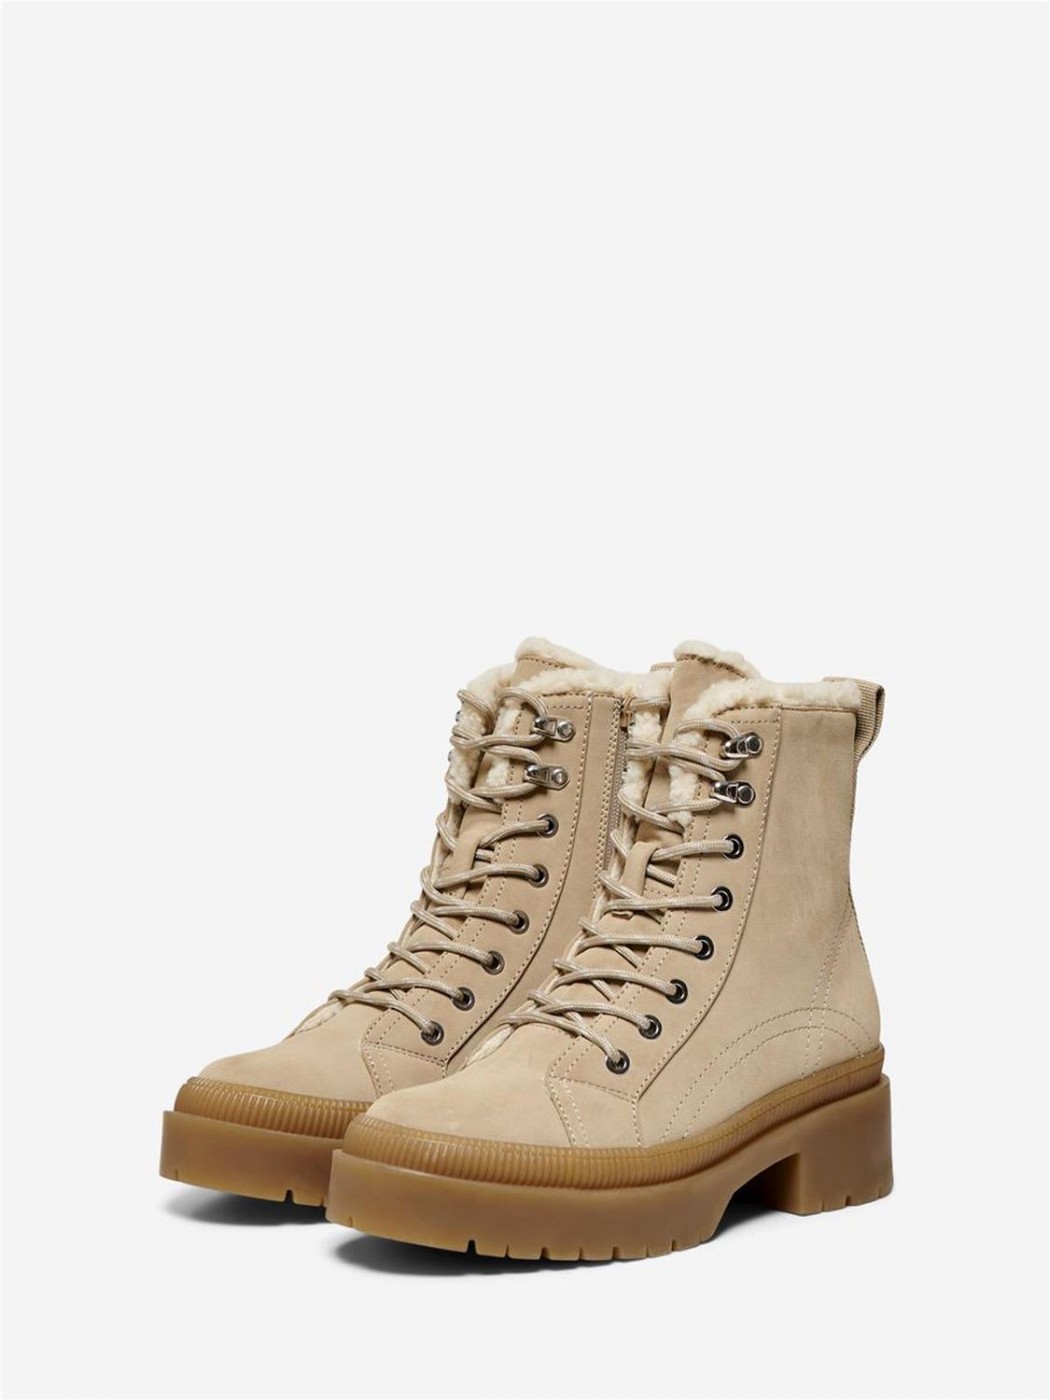 BOTAS ONLY MUJER BEIGE...